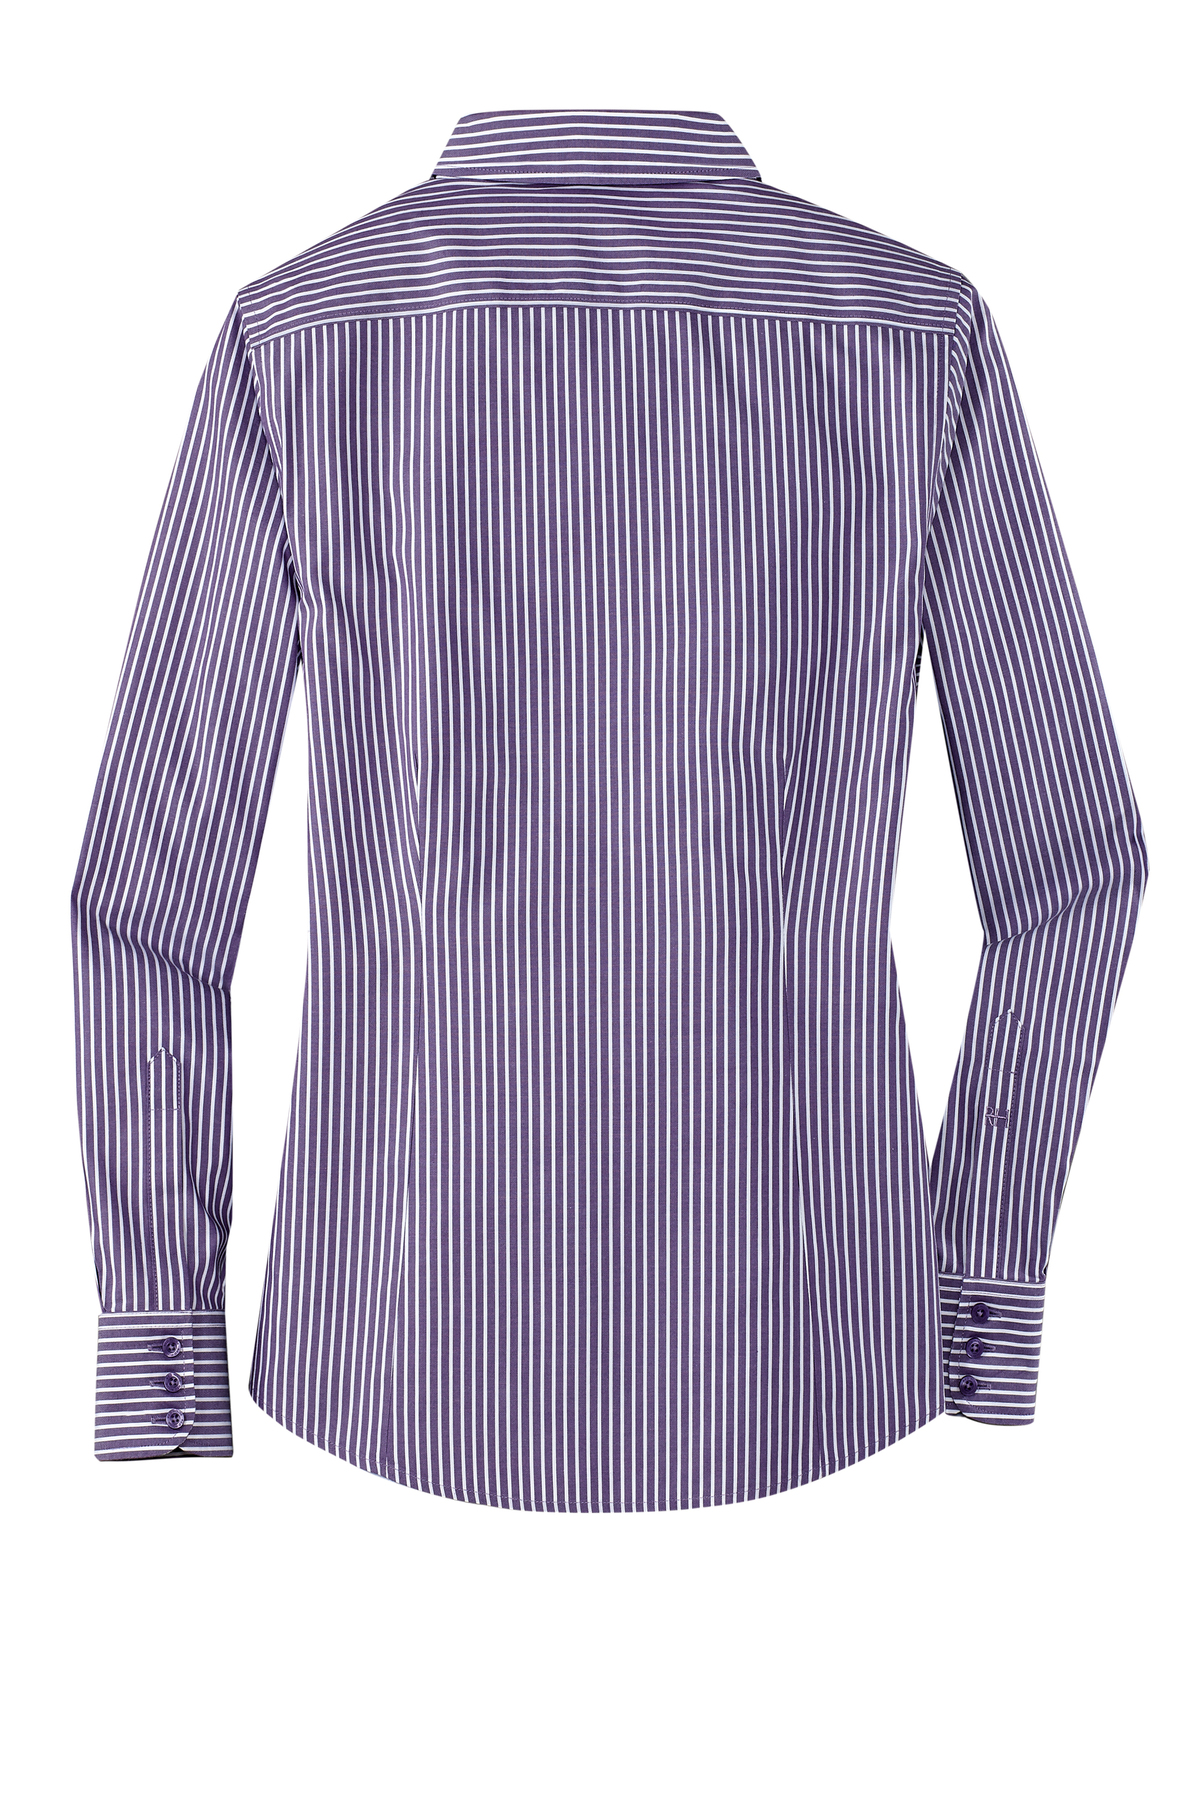 CLOSEOUT Red House - Ladies Stripe Non-Iron Pinpoint Oxford | Product ...